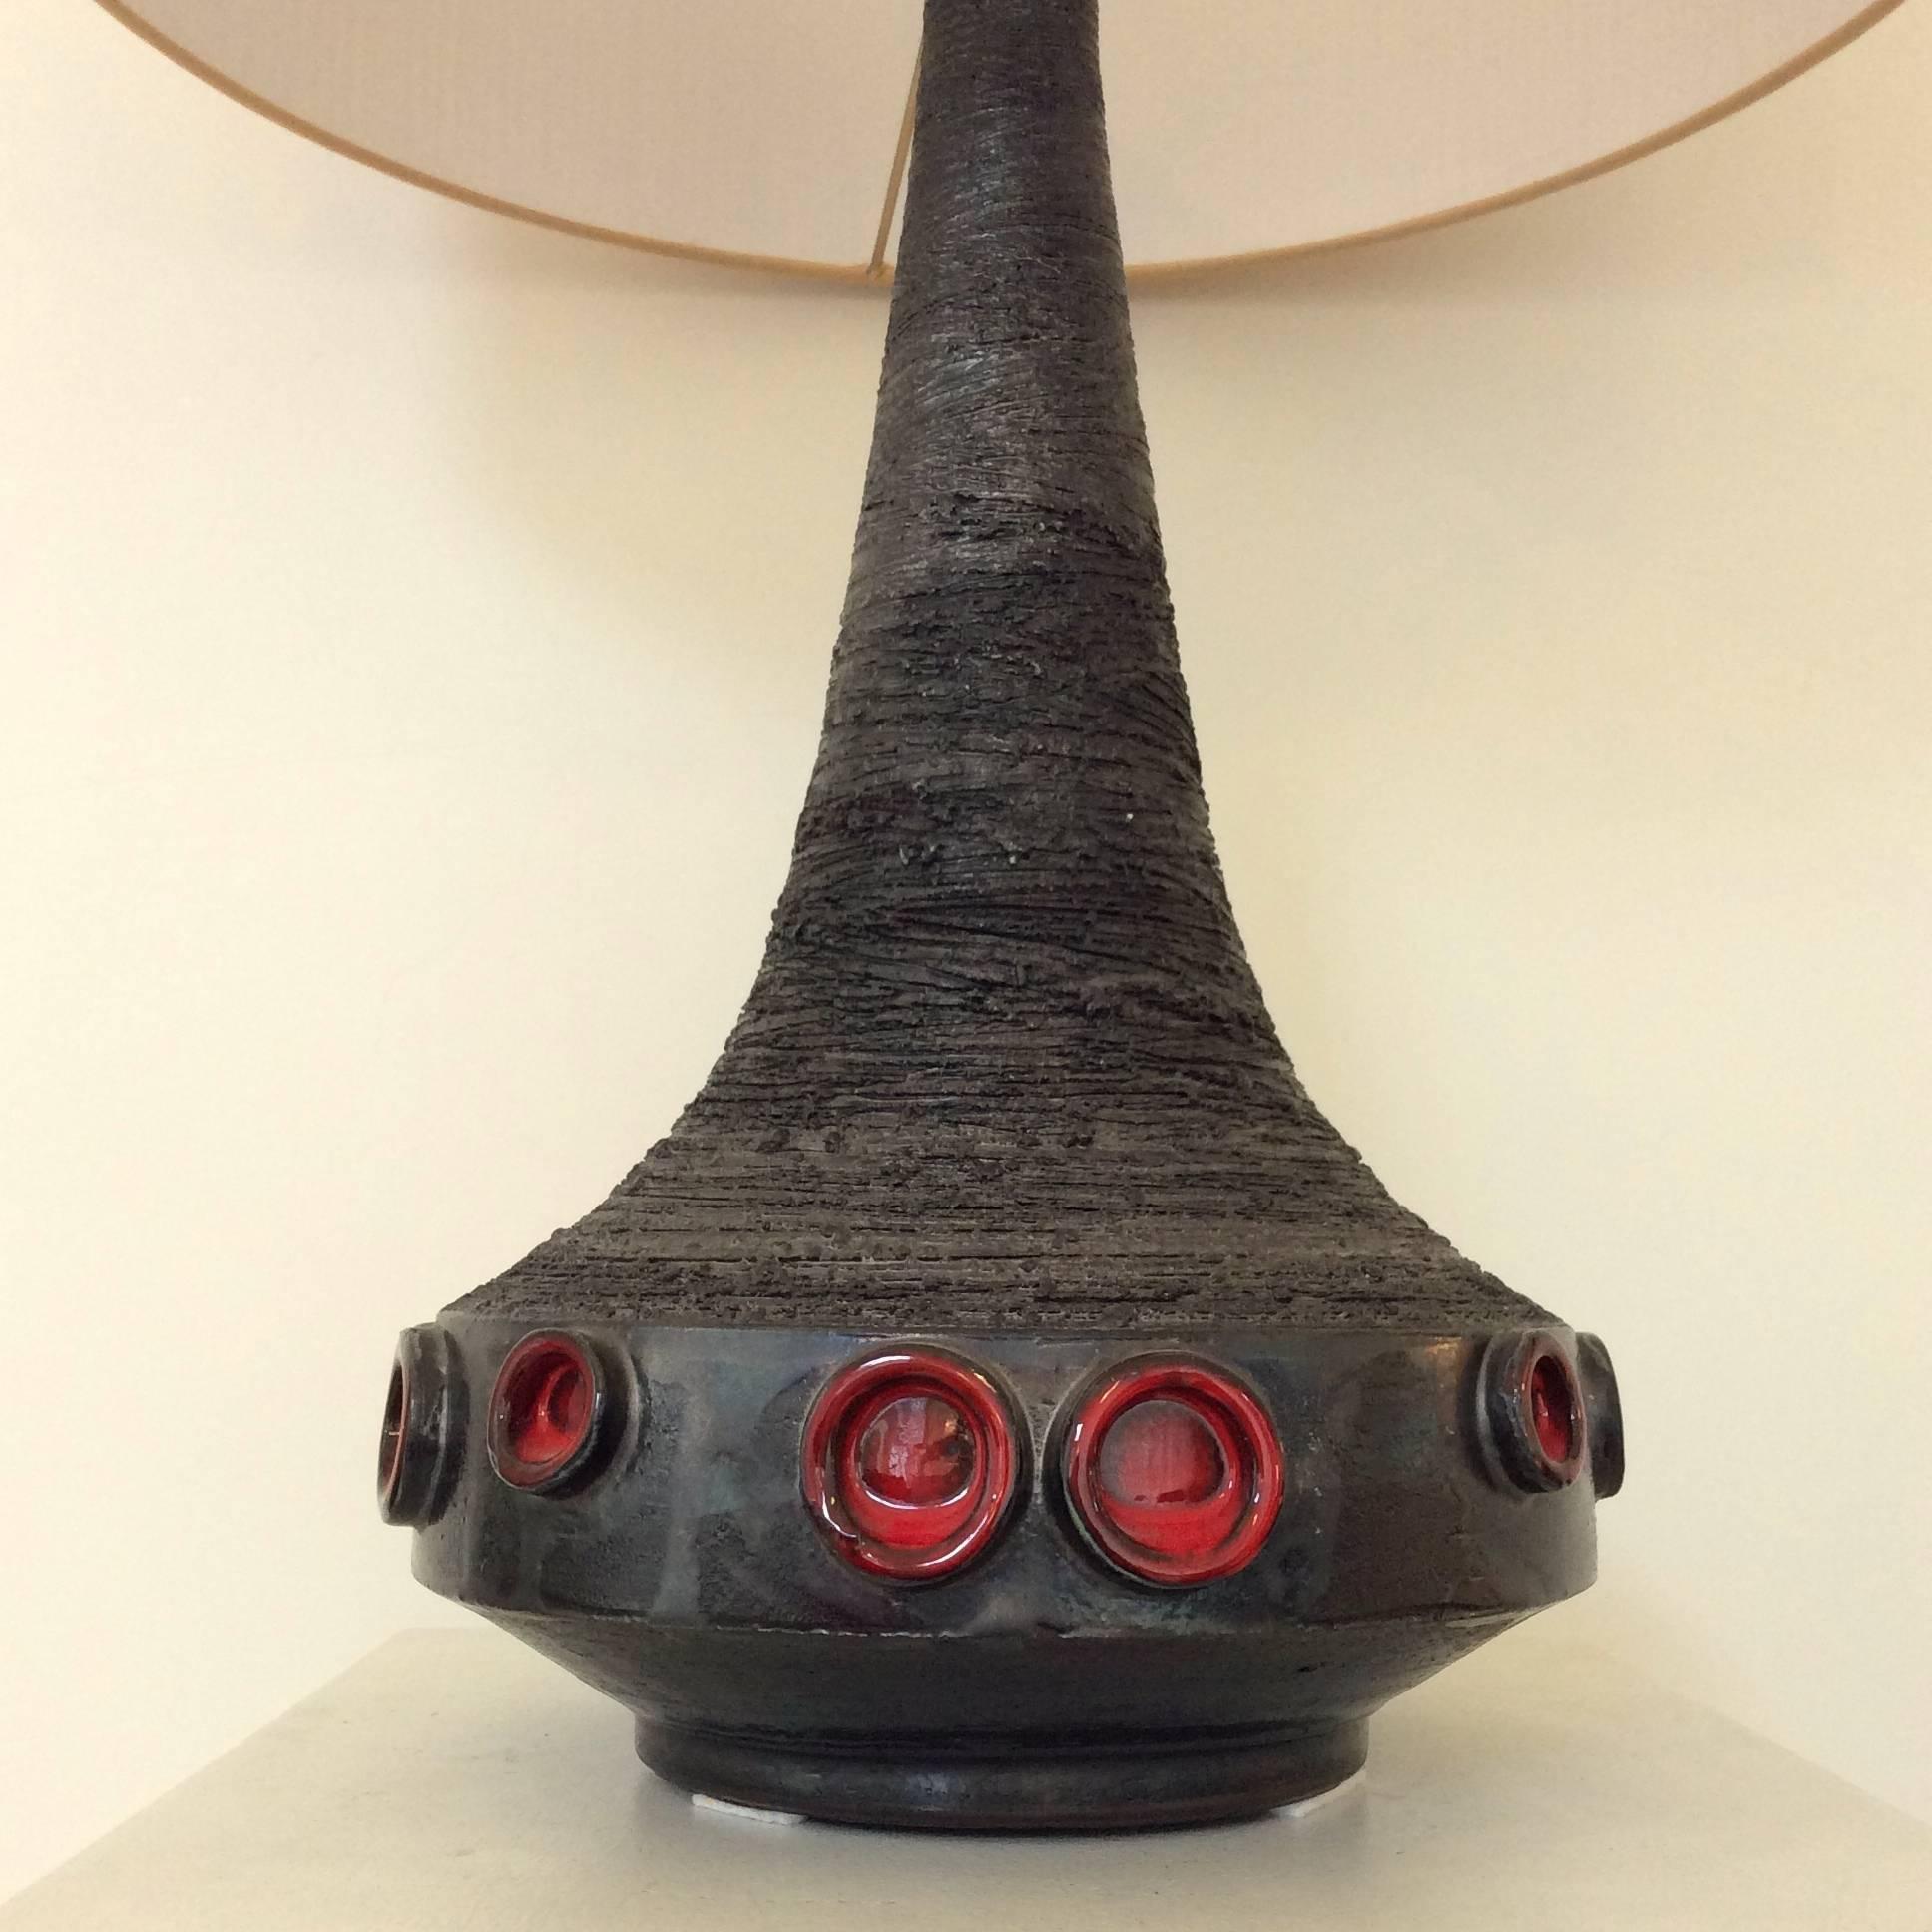 Black and red ceramic table lamp by Roger Vandeweghe
for Amphora ; circa 1960, Belgium.
New paper shade.
Rewired.
Dimensions: H: 65, diameter of the shade: 40 cm.
Good original condition.